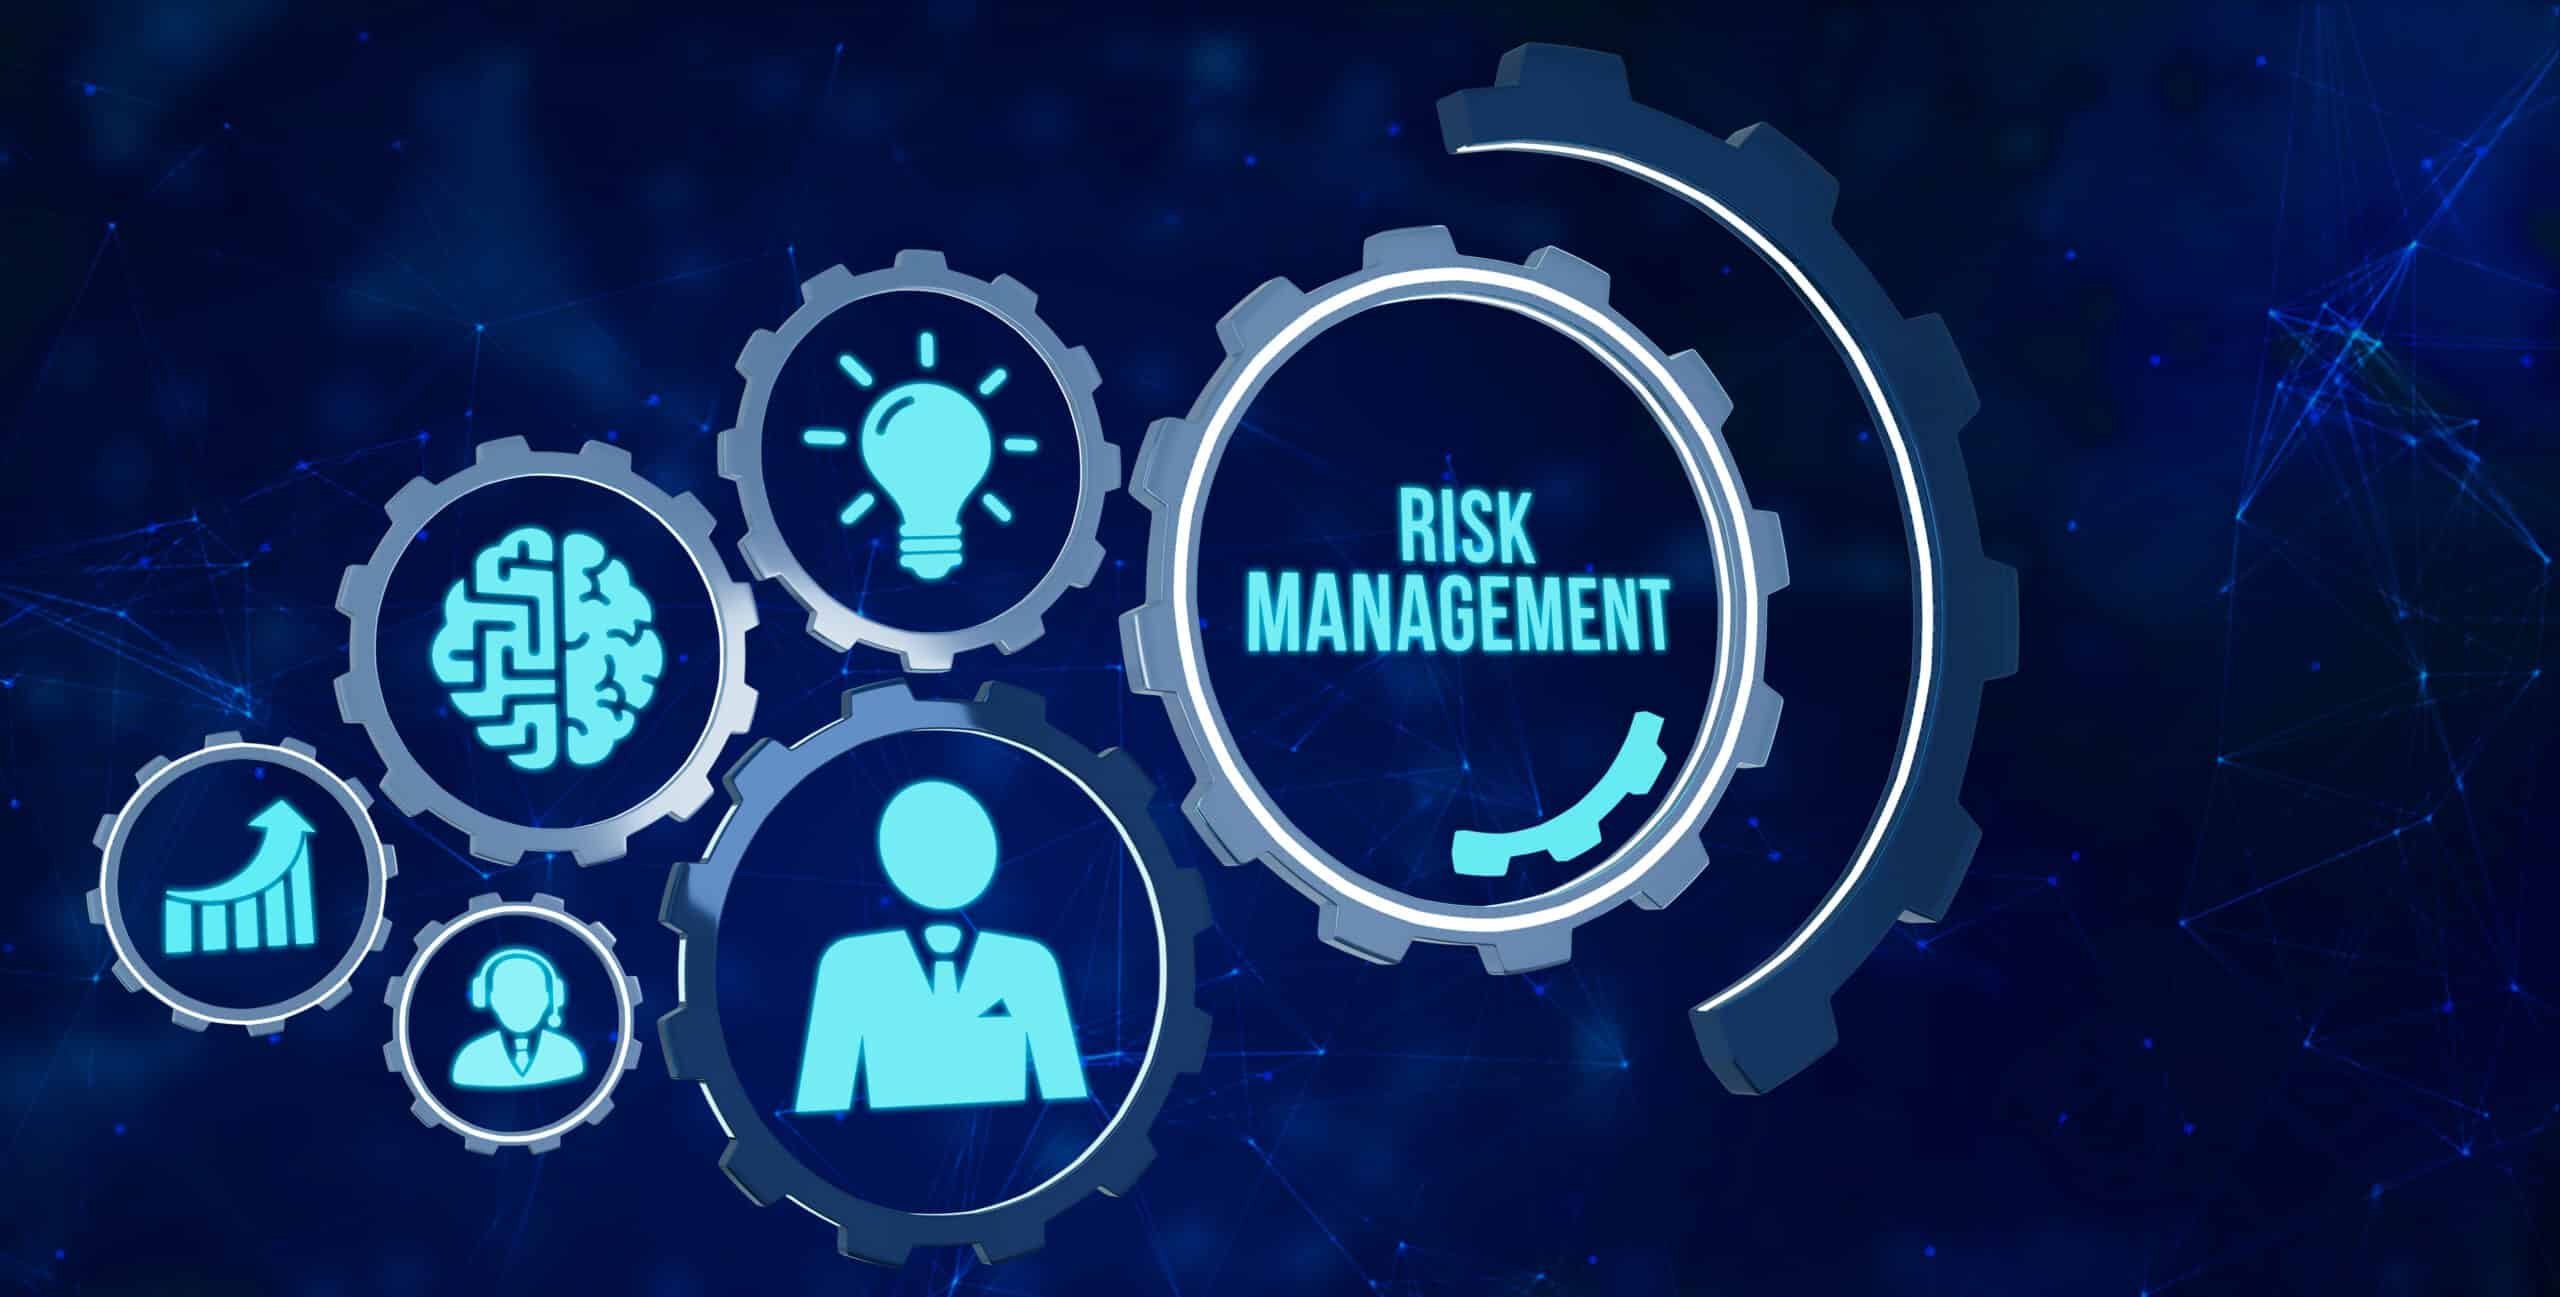 Expert Risk Management Services In Uae By Ahad Cybersecurity